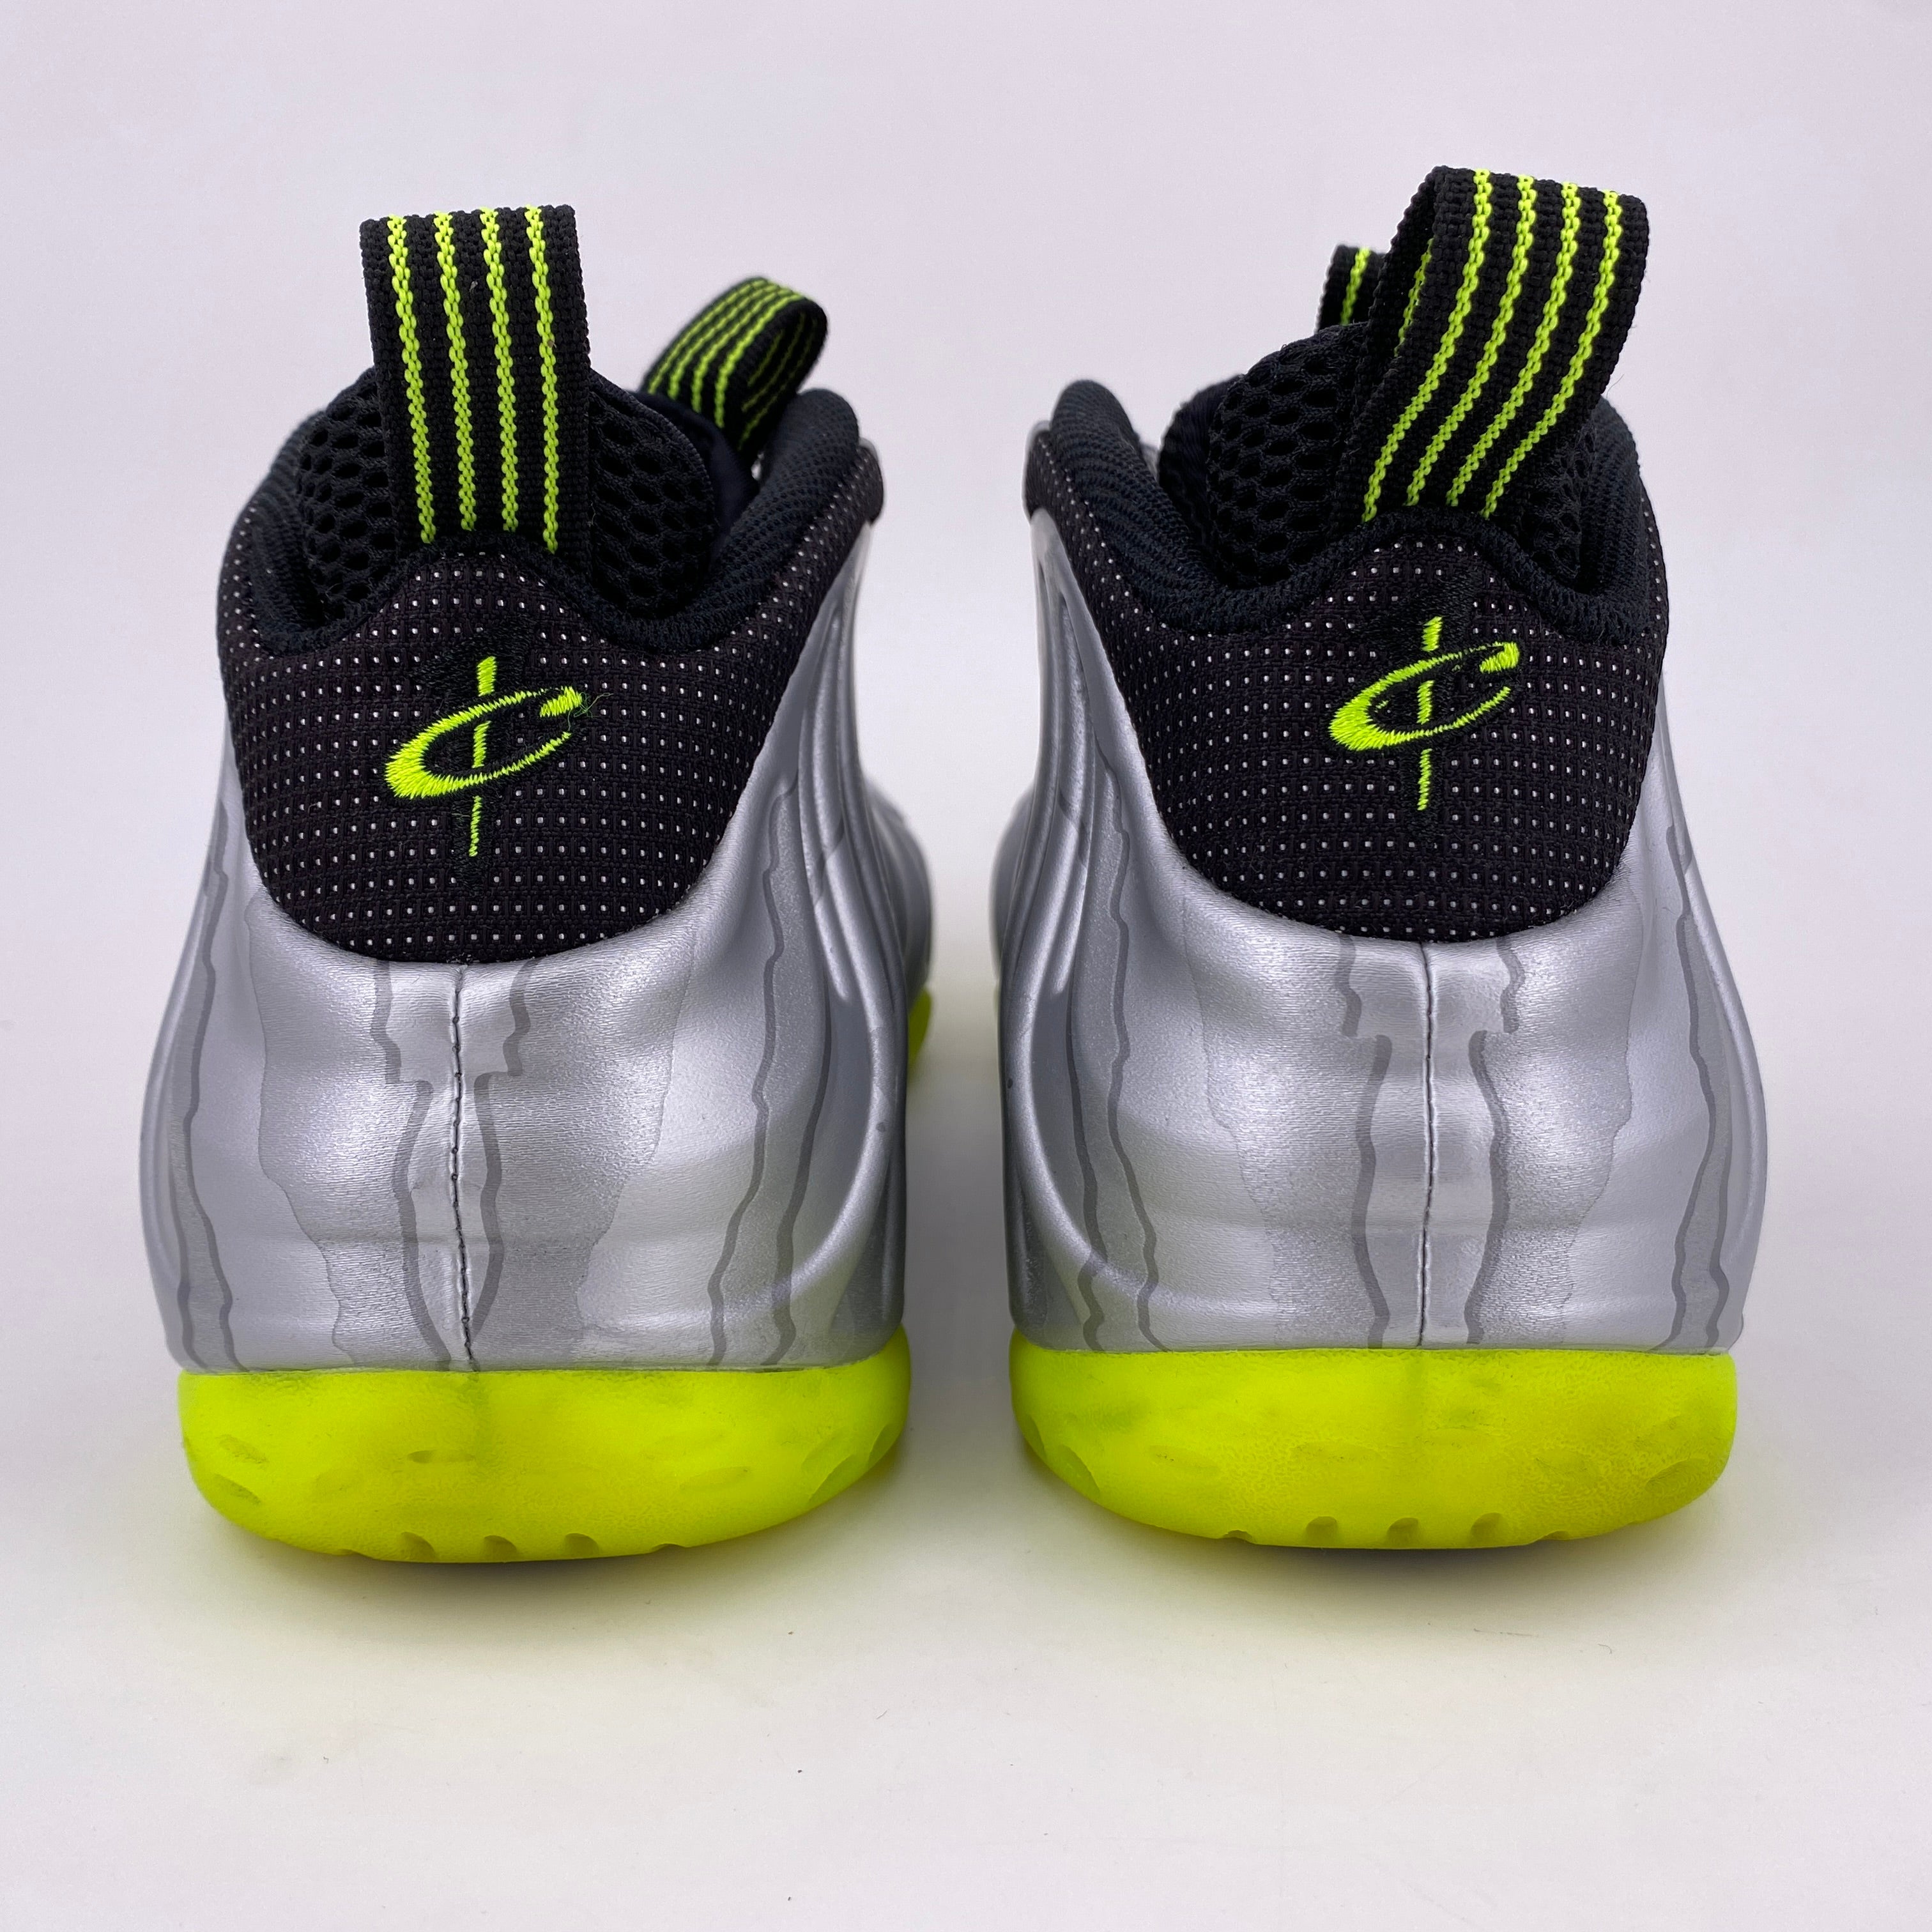 Nike Air Foamposite One &quot;Silver Volt Camo&quot; 2014 Used Size 10